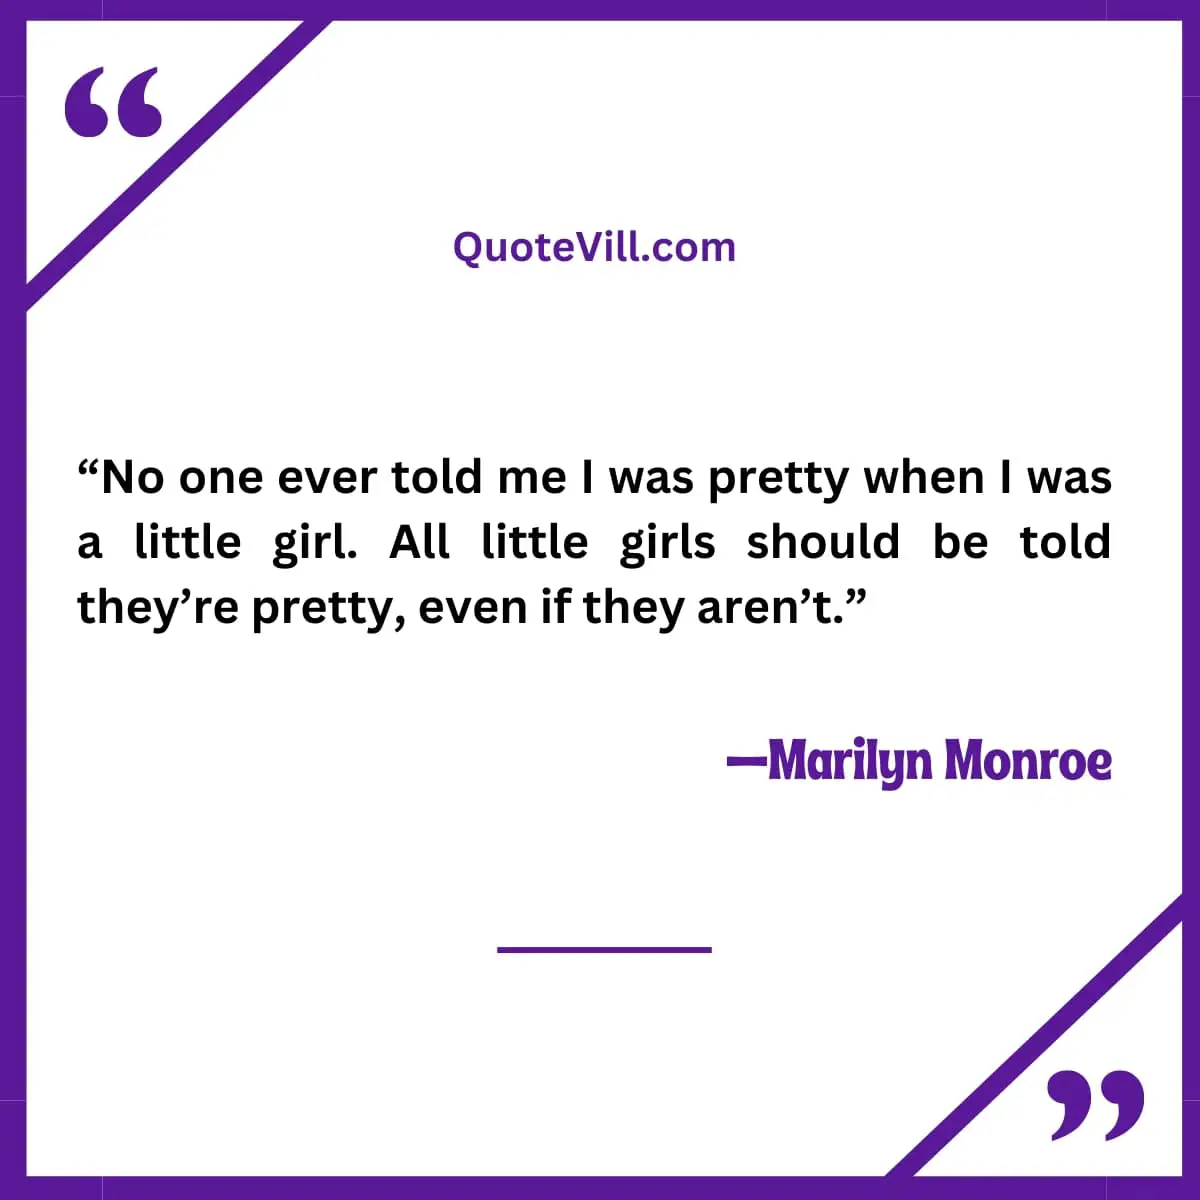 Marilyn Monroe's Quotes on Happiness